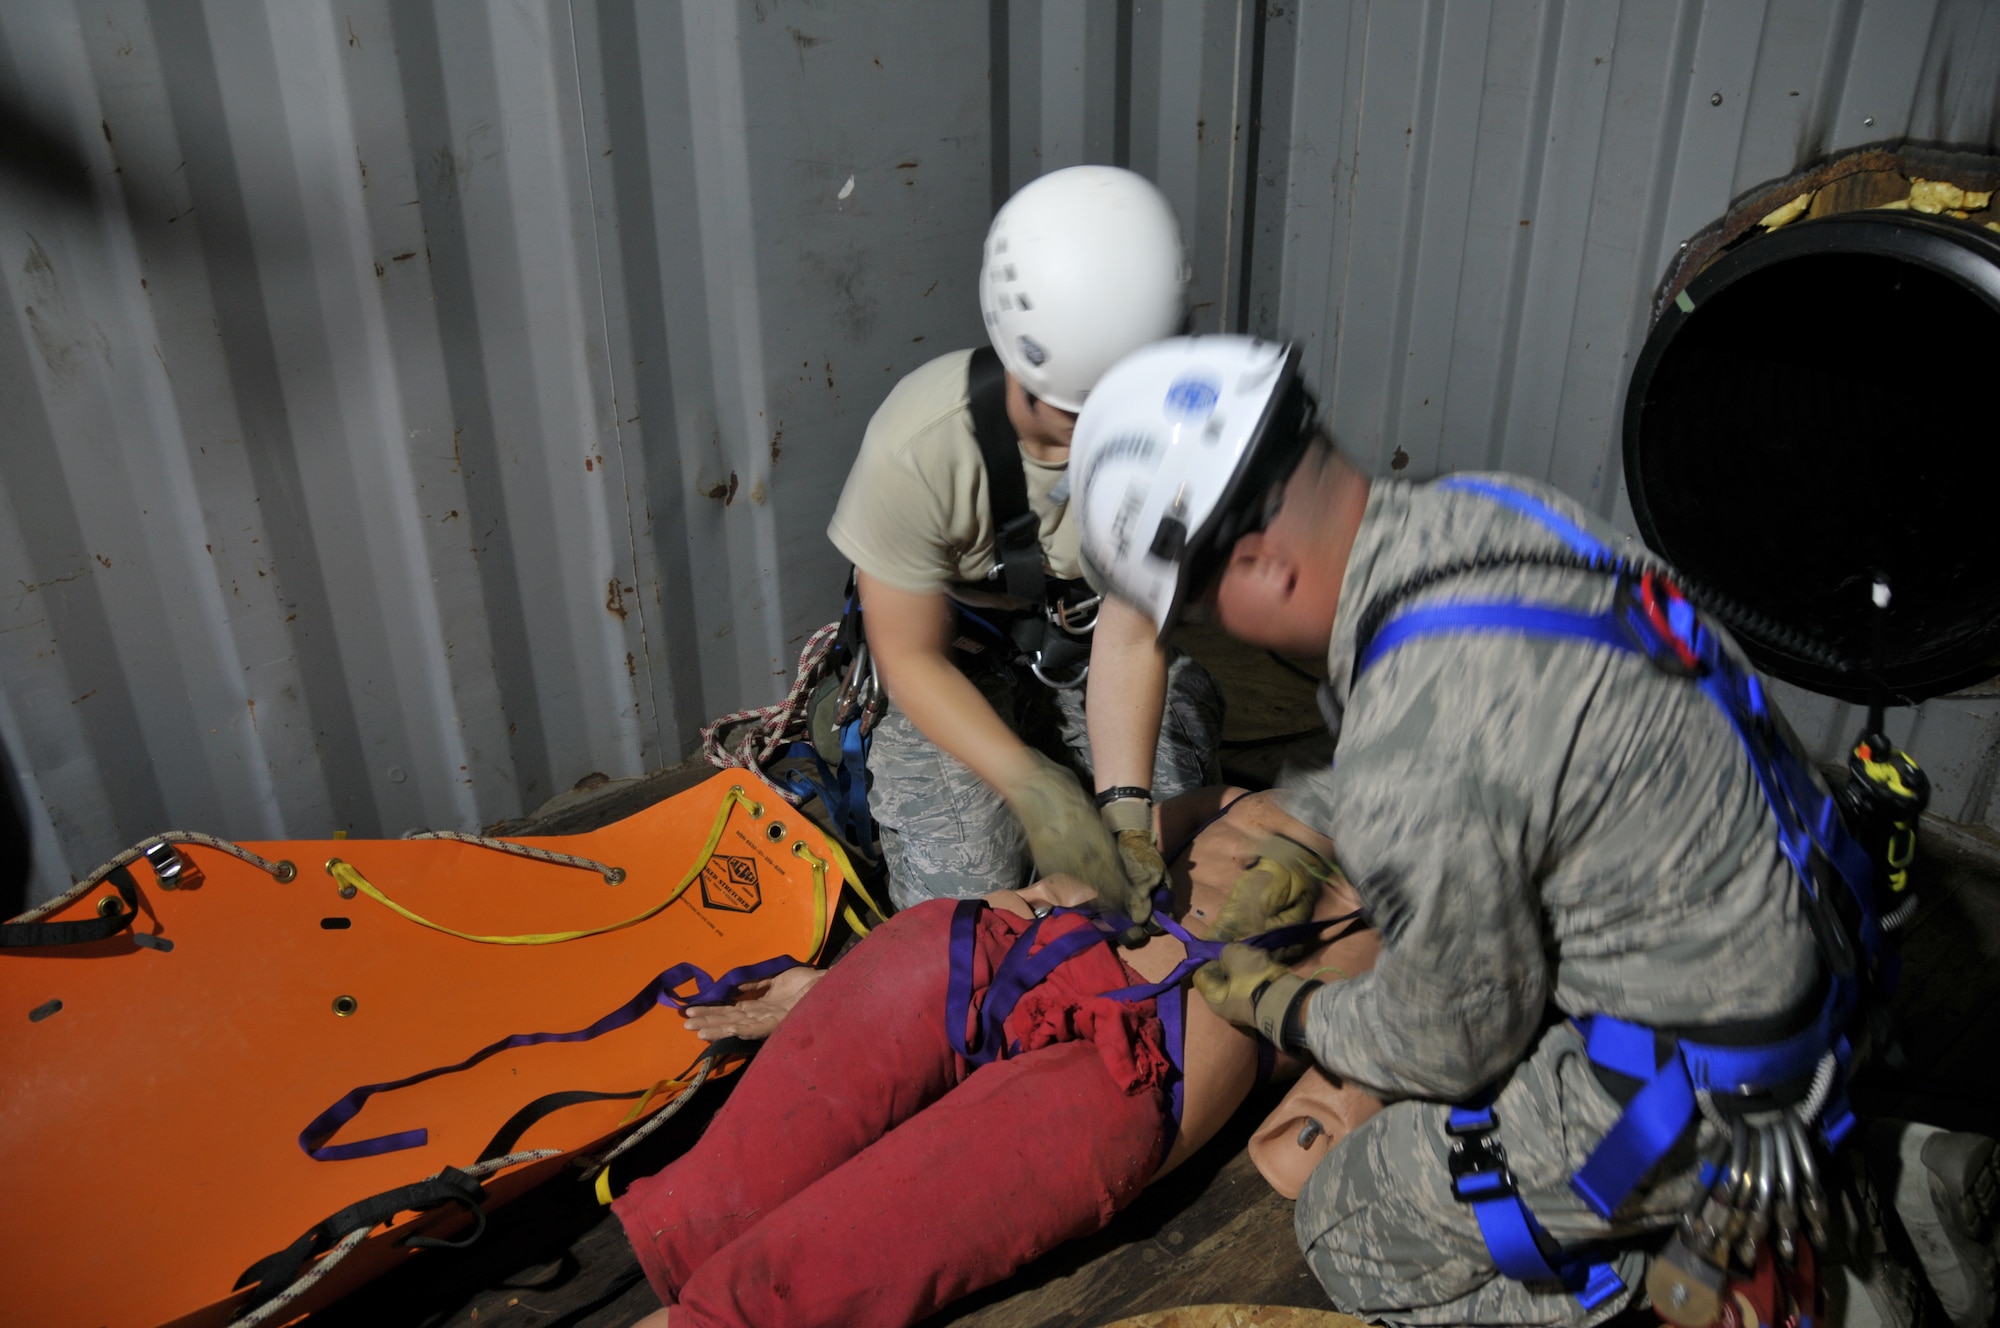 Staff Sgt. Jennifer Bristol and Staff Sgt. Christopher Meyer prepare a victim for rescue during confined space training for the 109th Fire Department's search and rescue team at Stratton Air National Guard Base, New York, on Sept. 17, 2015. The 12-person search and rescue team trains monthly on various rescue techniques. (U.S. Air National Guard photo by Tech. Sgt. Catharine Schmidt/Released)